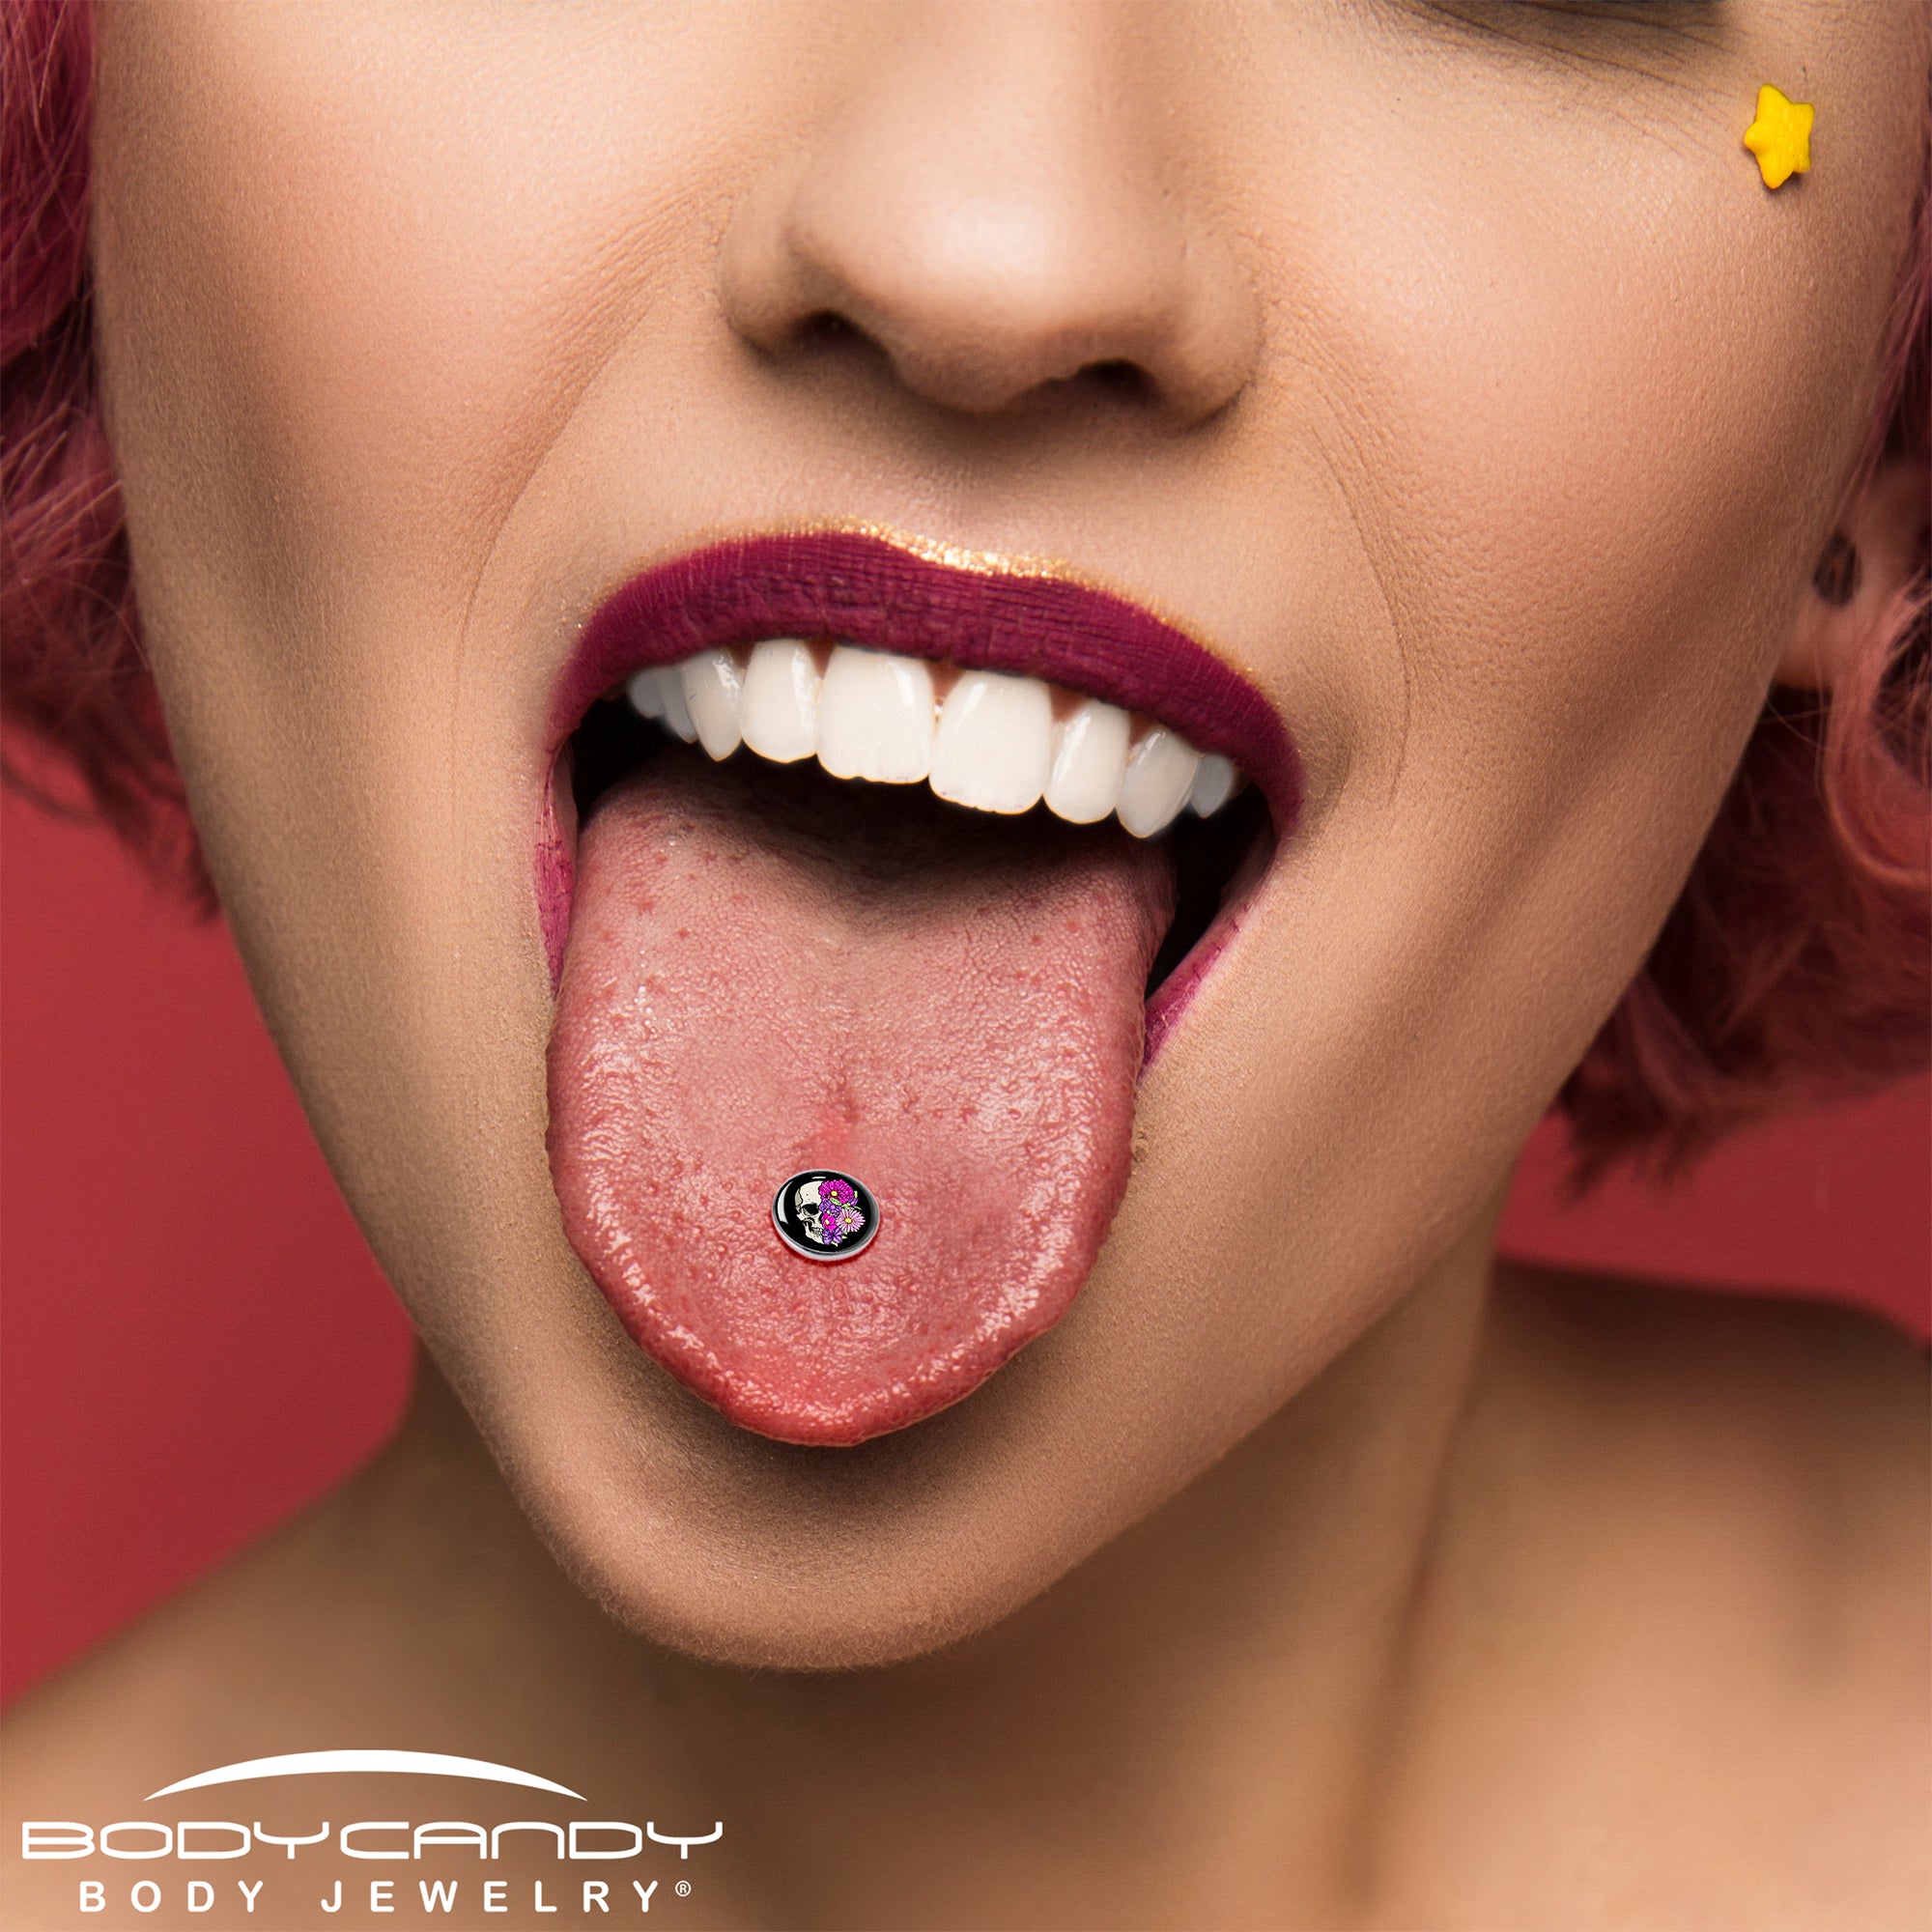 Floral Flowers Skull Barbell Tongue Ring